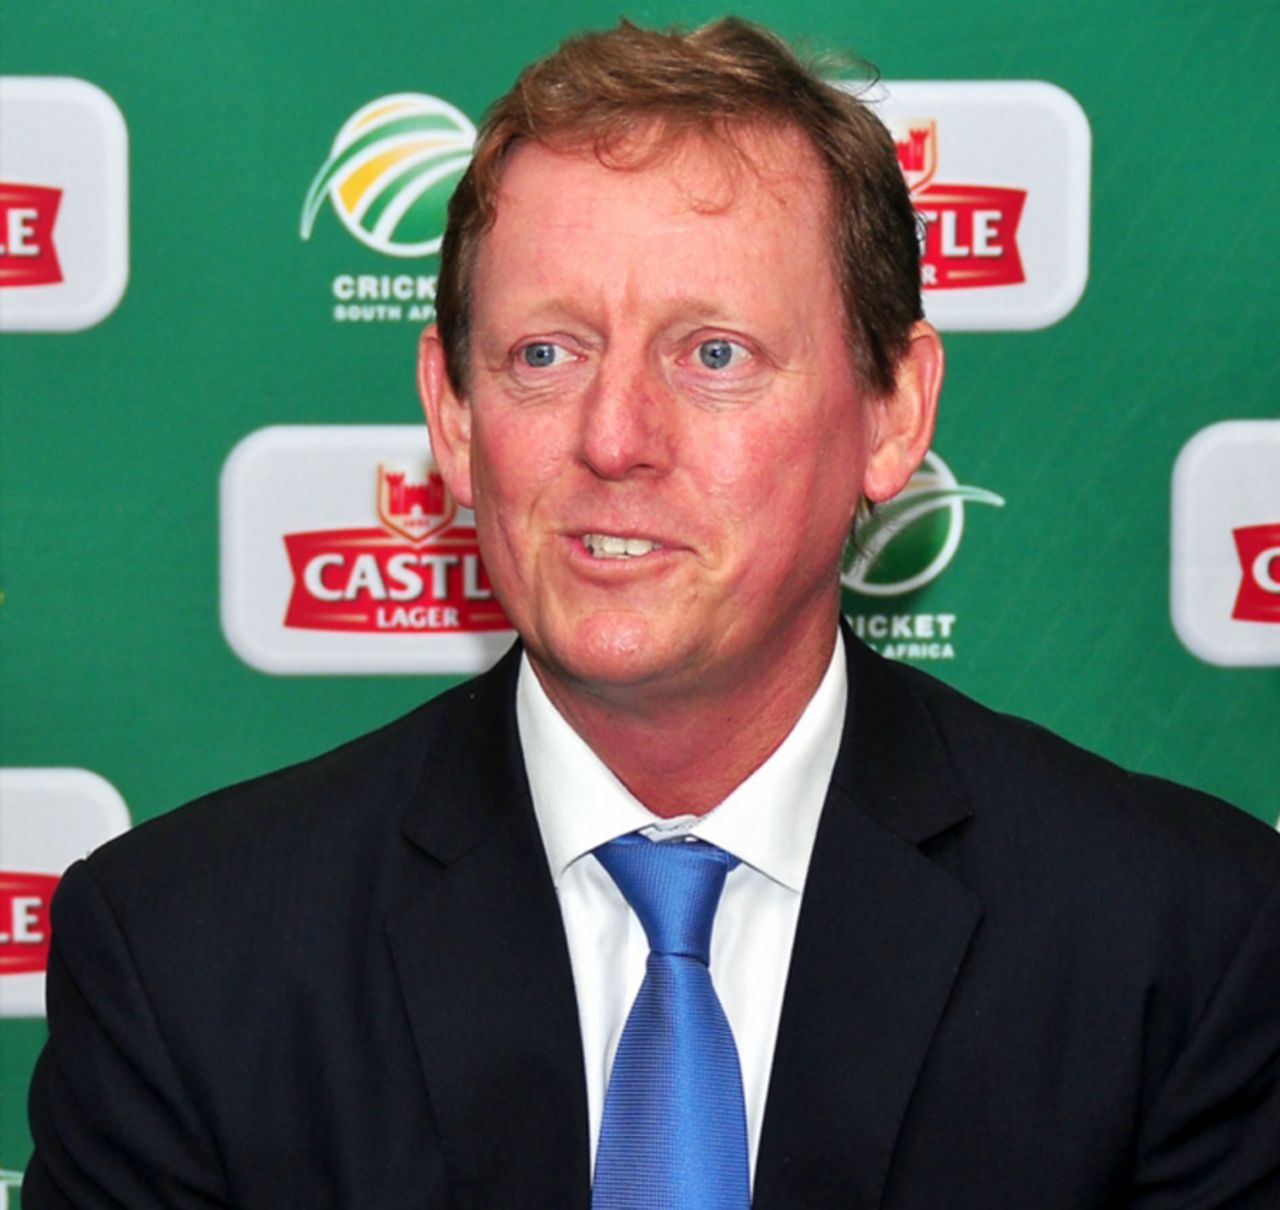 Andrew Hudson, convener of South Africa's selection committee, talks to the media, July 2013